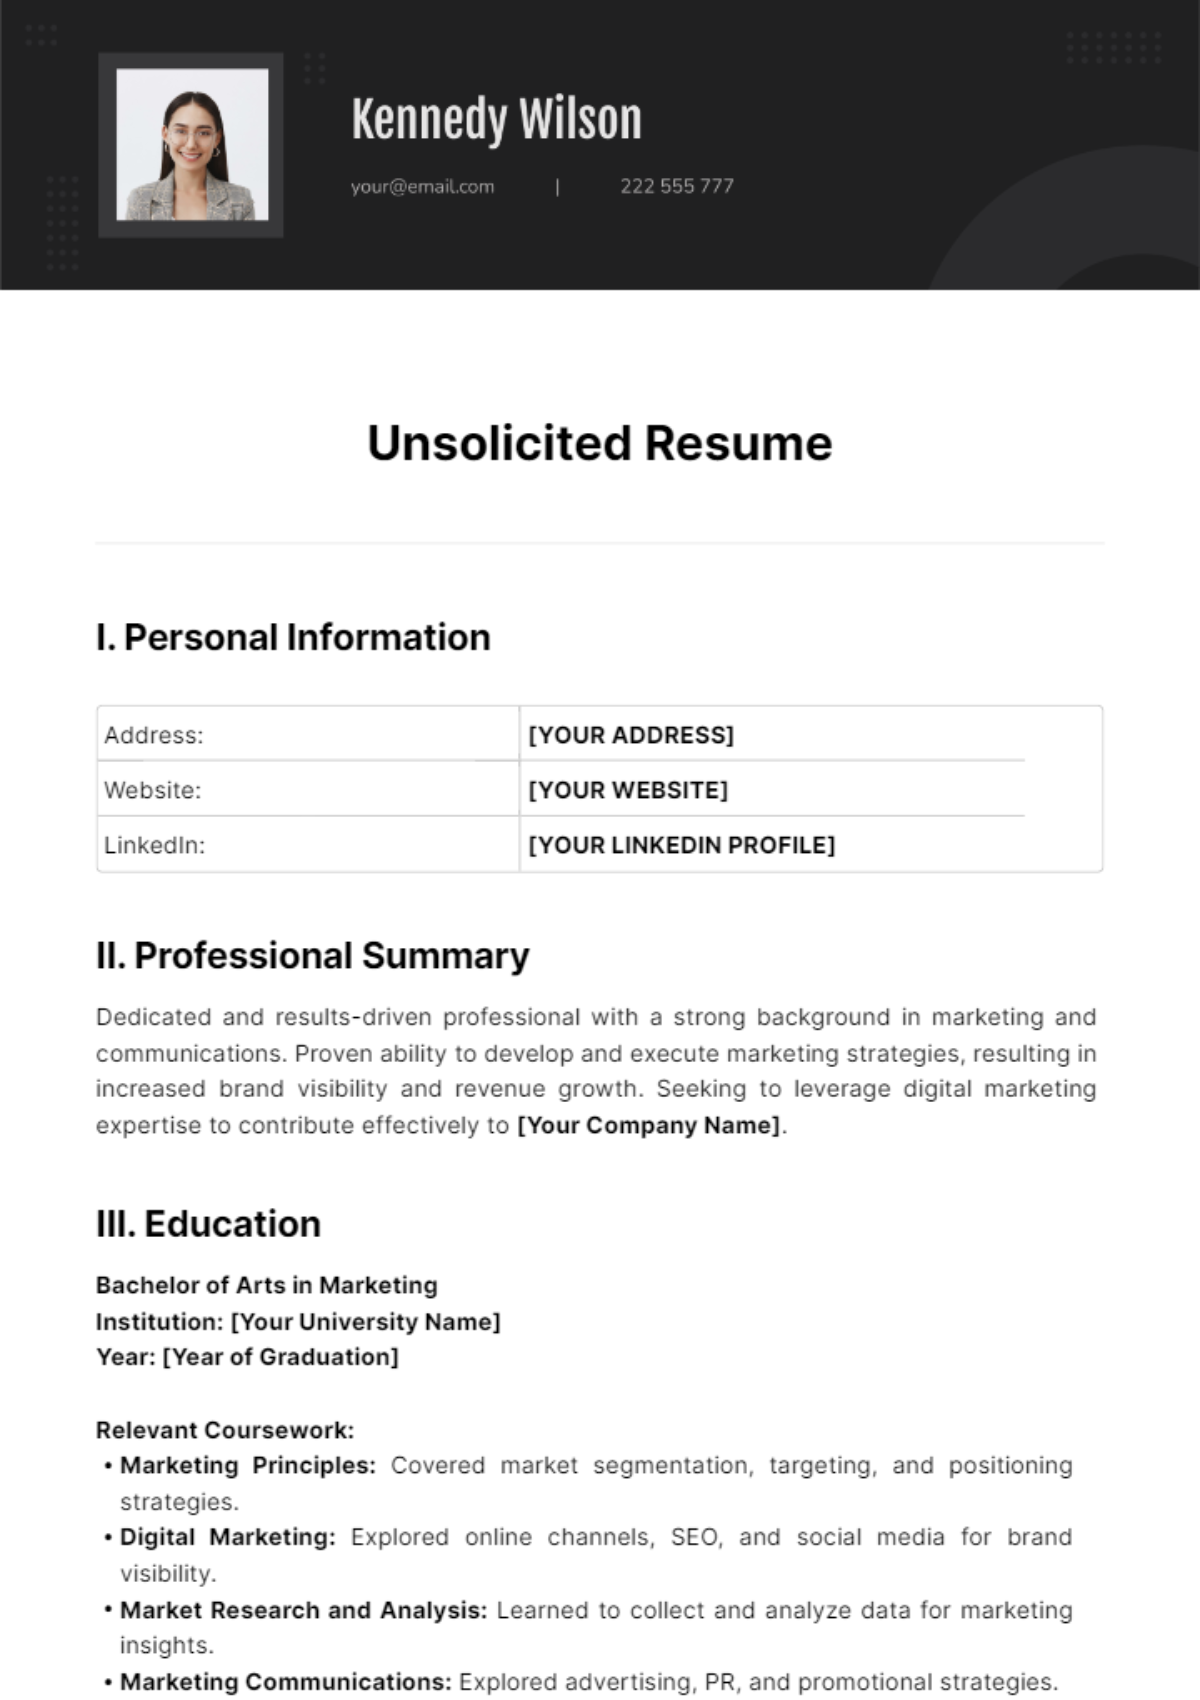 Unsolicited Resume Template